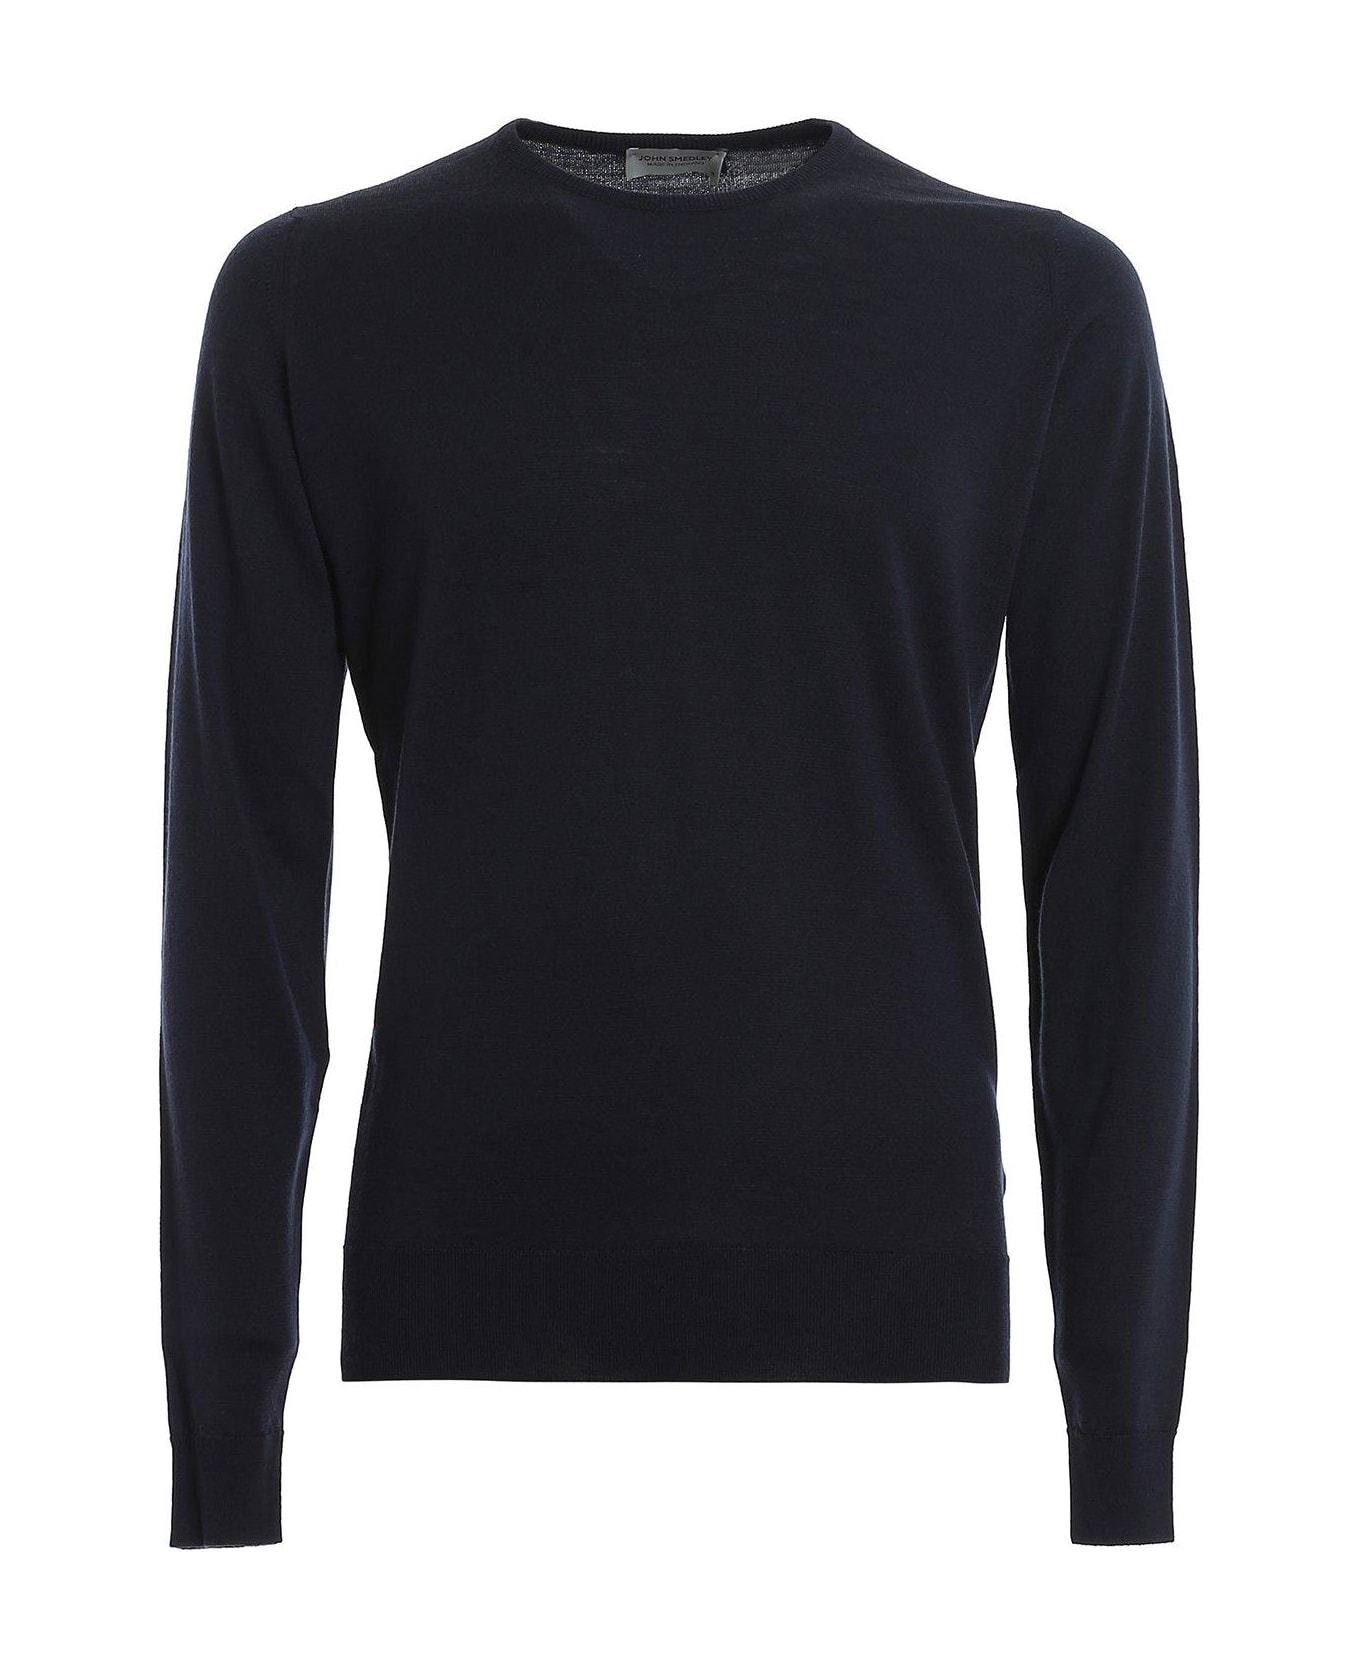 John Smedley Lundy Knitted Jumper - NAVY